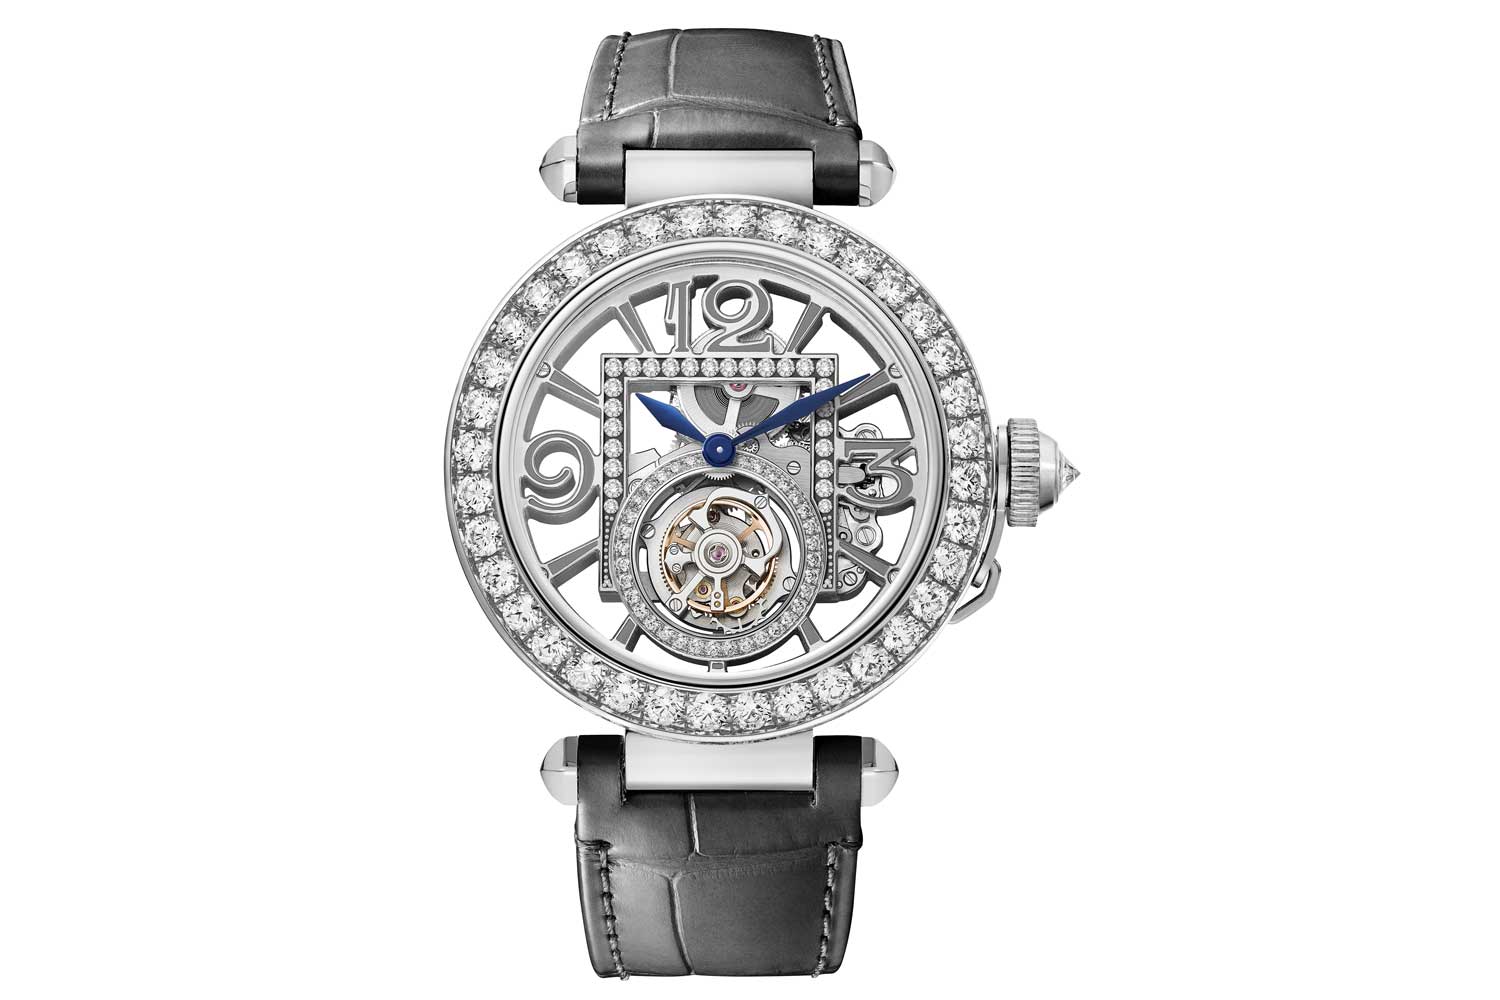 Pasha de Cartier watch, 41 mm, tourbillon; hours and minutes with skeletonised bridges forming Arabic numerals; mechanical movement with manual winding, calibre 9466 MC. 18K white gold case set with diamonds, crown set with brilliant cut diamond , blued-steel diamond-shaped hands, 2 alligator-skin straps, 1 black and 1 dark grey with "QuickSwitch" interchangeability system, interchangeable 18K rose gold folding buckle